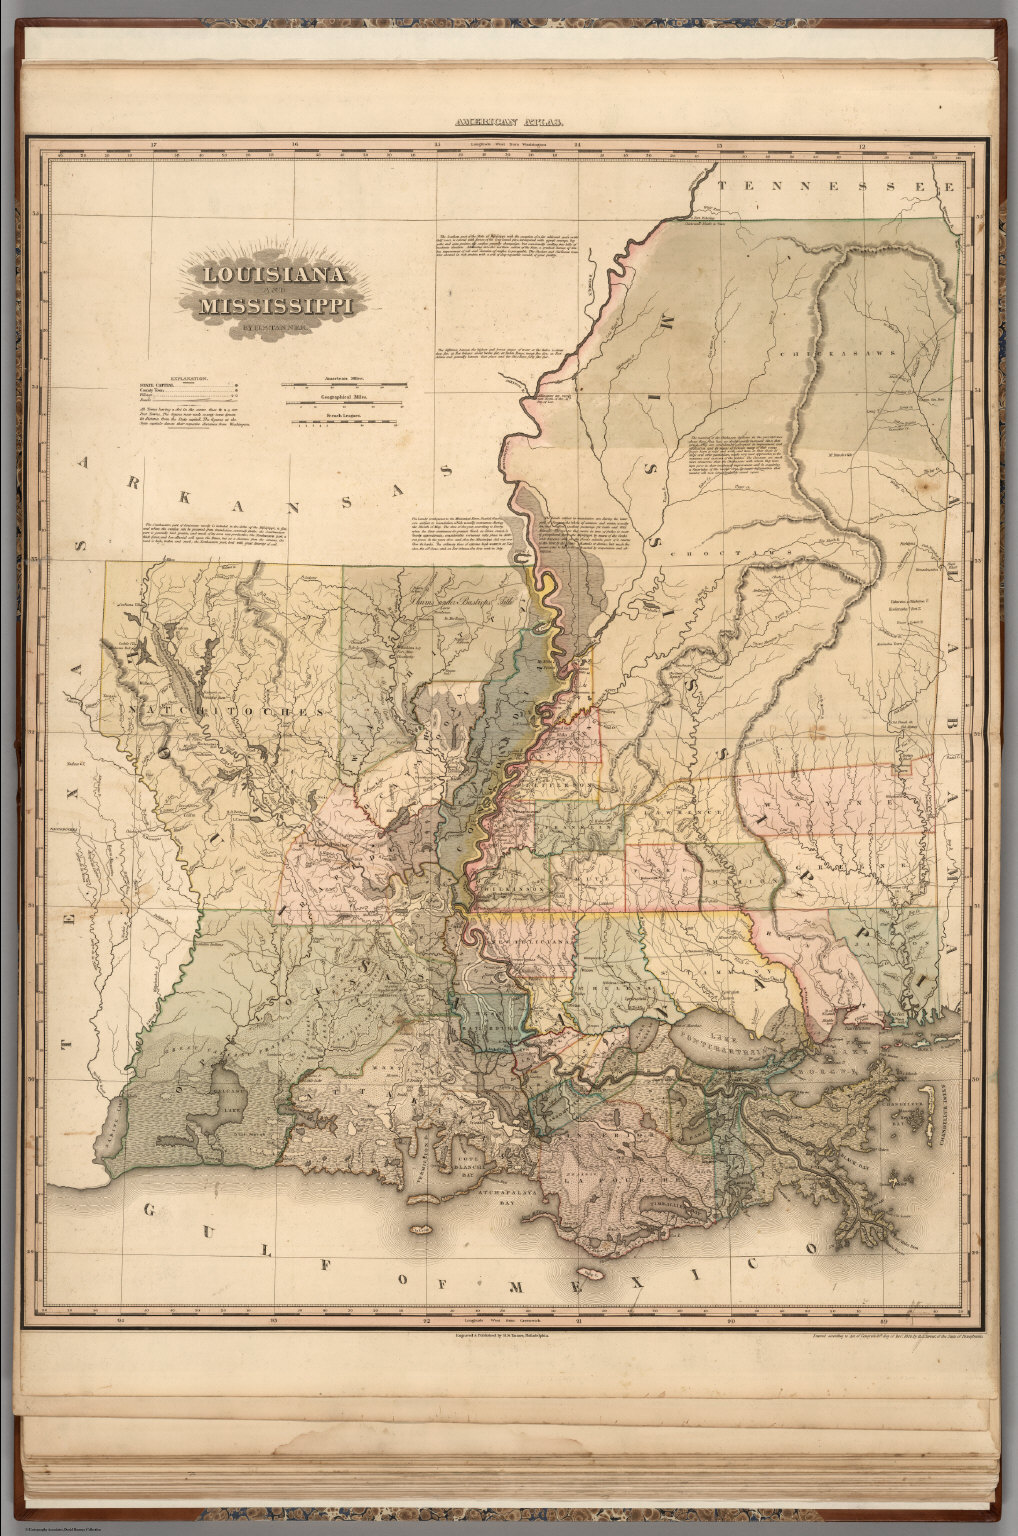 Louisiana and Mississippi. - David Rumsey Historical Map Collection